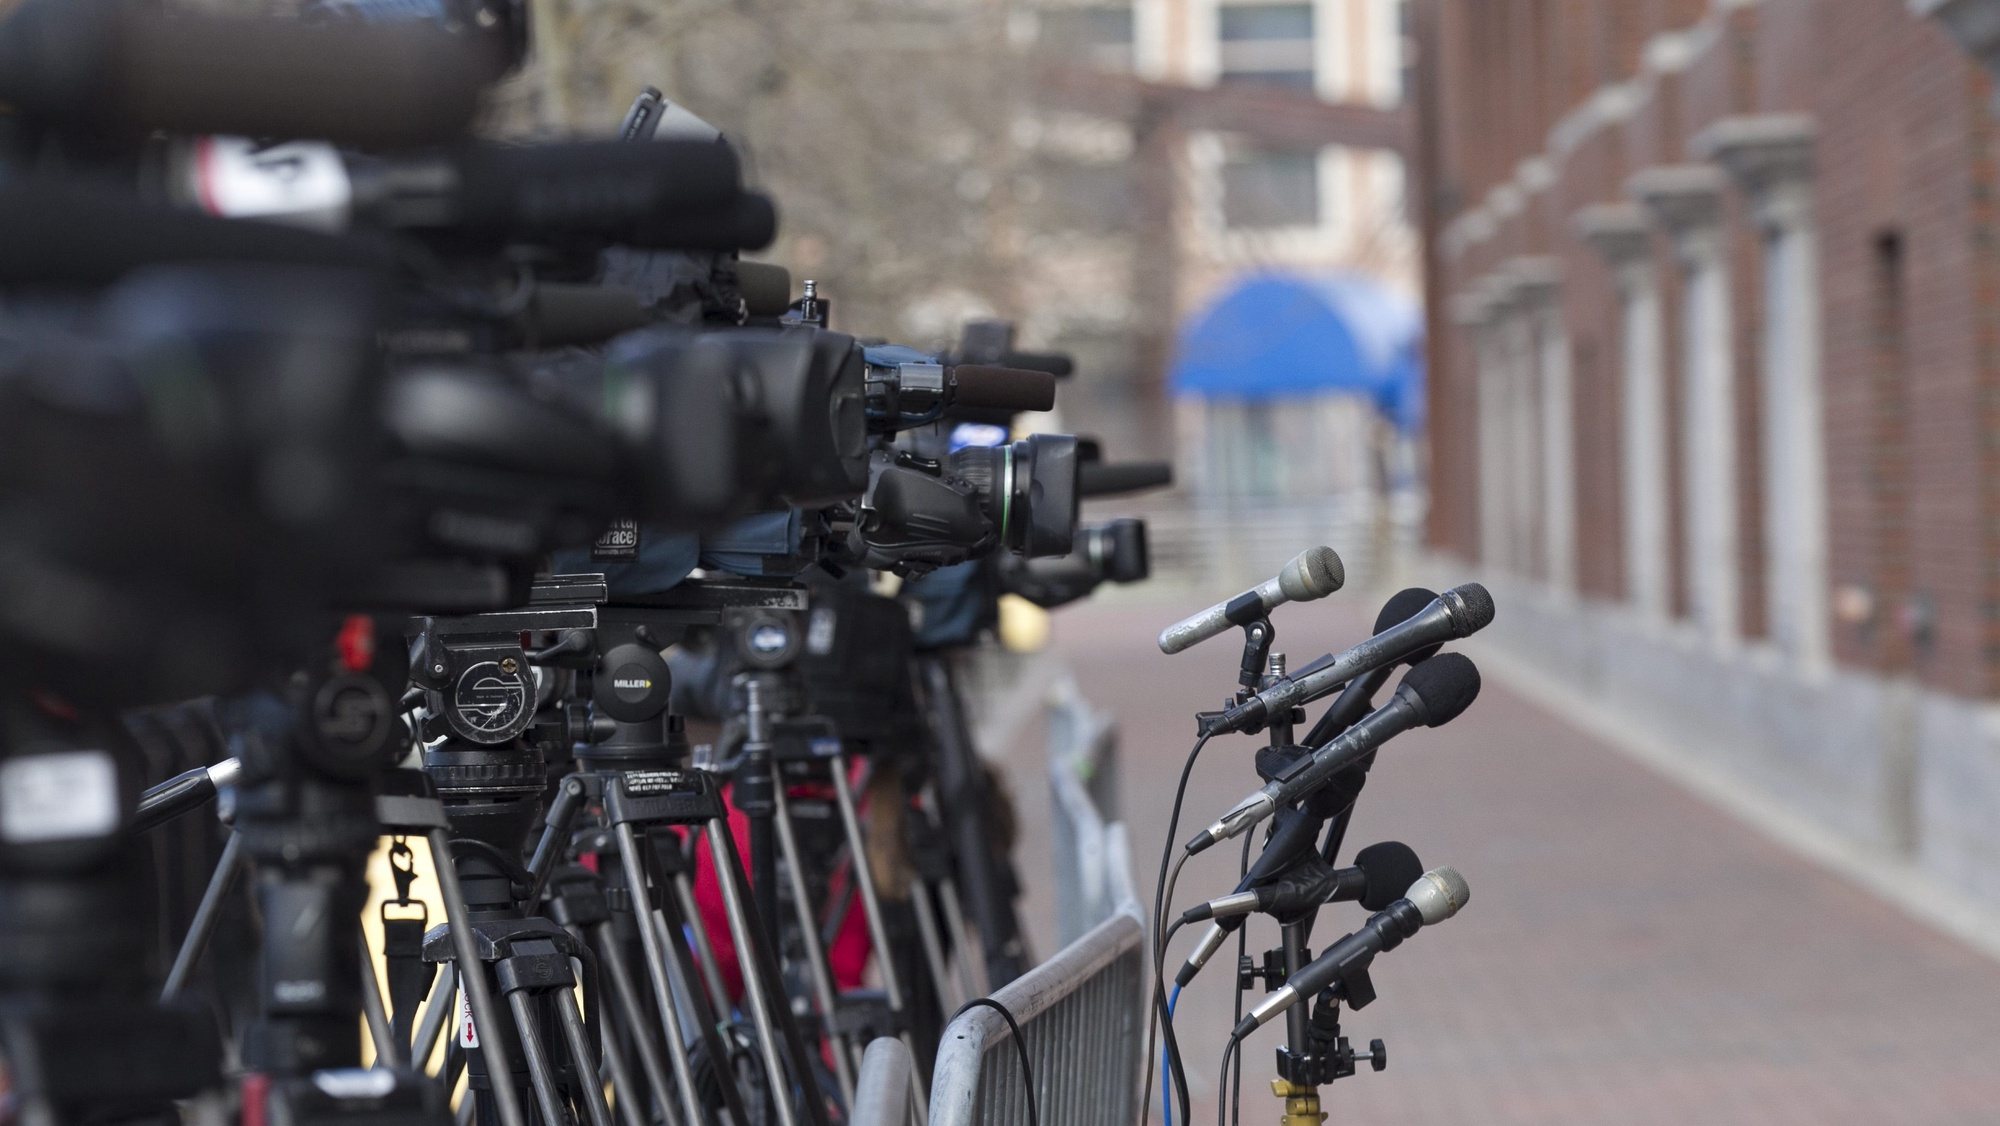 epa04695649 Media cameras and microphones outside the John J Moakley Federal Courthouse during the verdict deliberation of Tsarnaev&#039;s trial in Boston, Massachusetts, USA, 08 April 2015. Verdict deliberation in the Federal trial of Dzhokhar Tsarnaev continues today.  EPA/KATHERINE TAYLOR